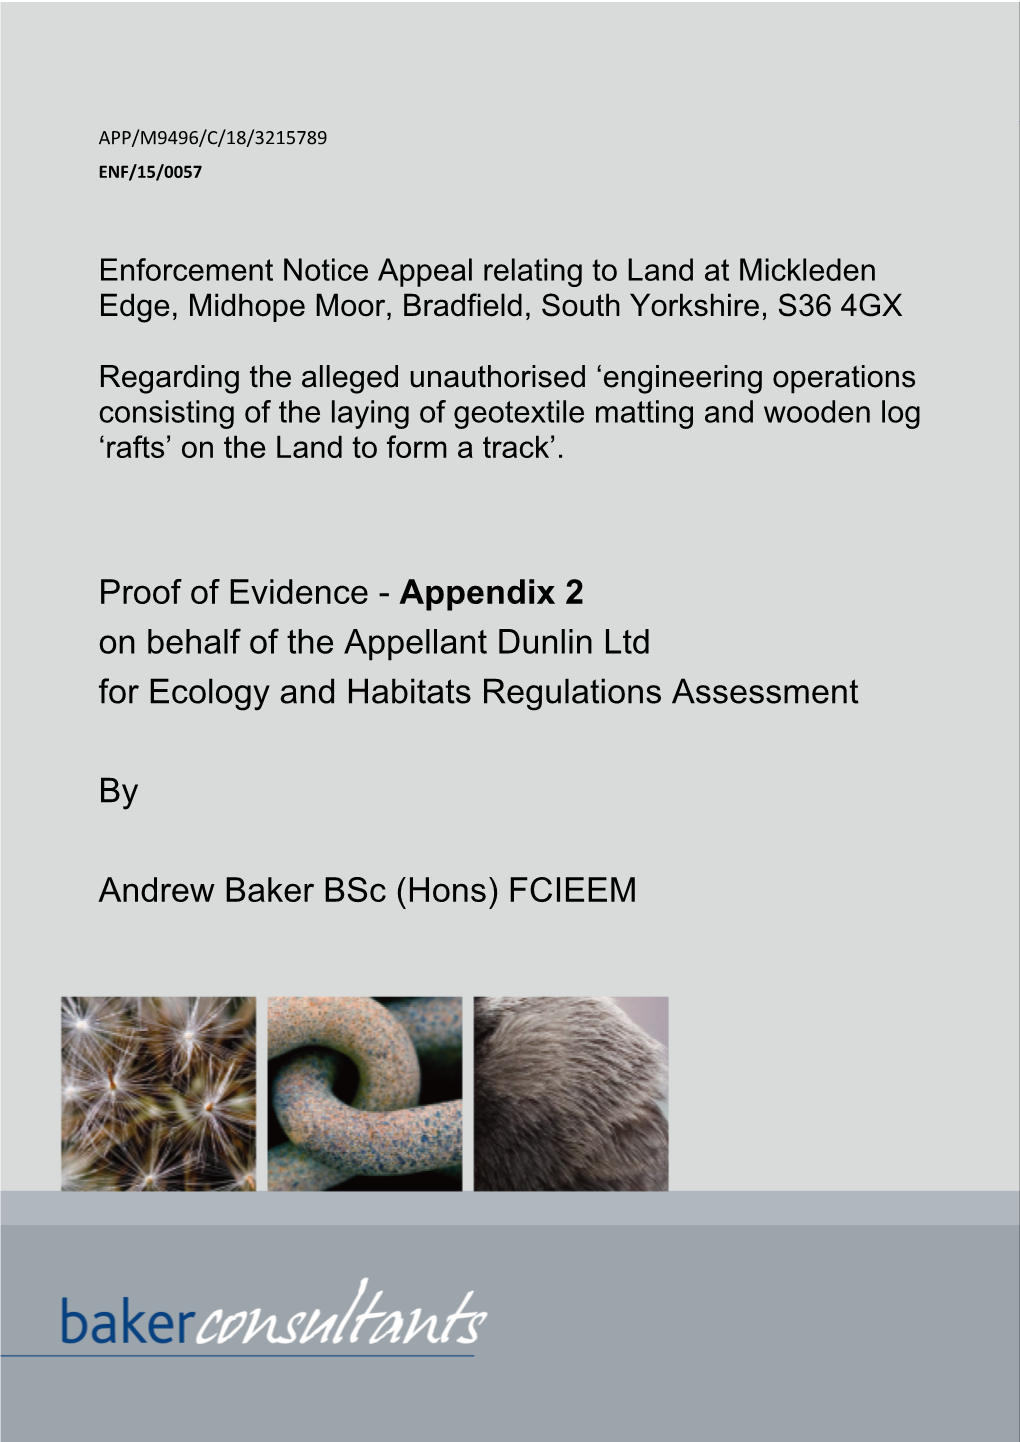 Proof of Evidence - Appendix 2 on Behalf of the Appellant Dunlin Ltd for Ecology and Habitats Regulations Assessment